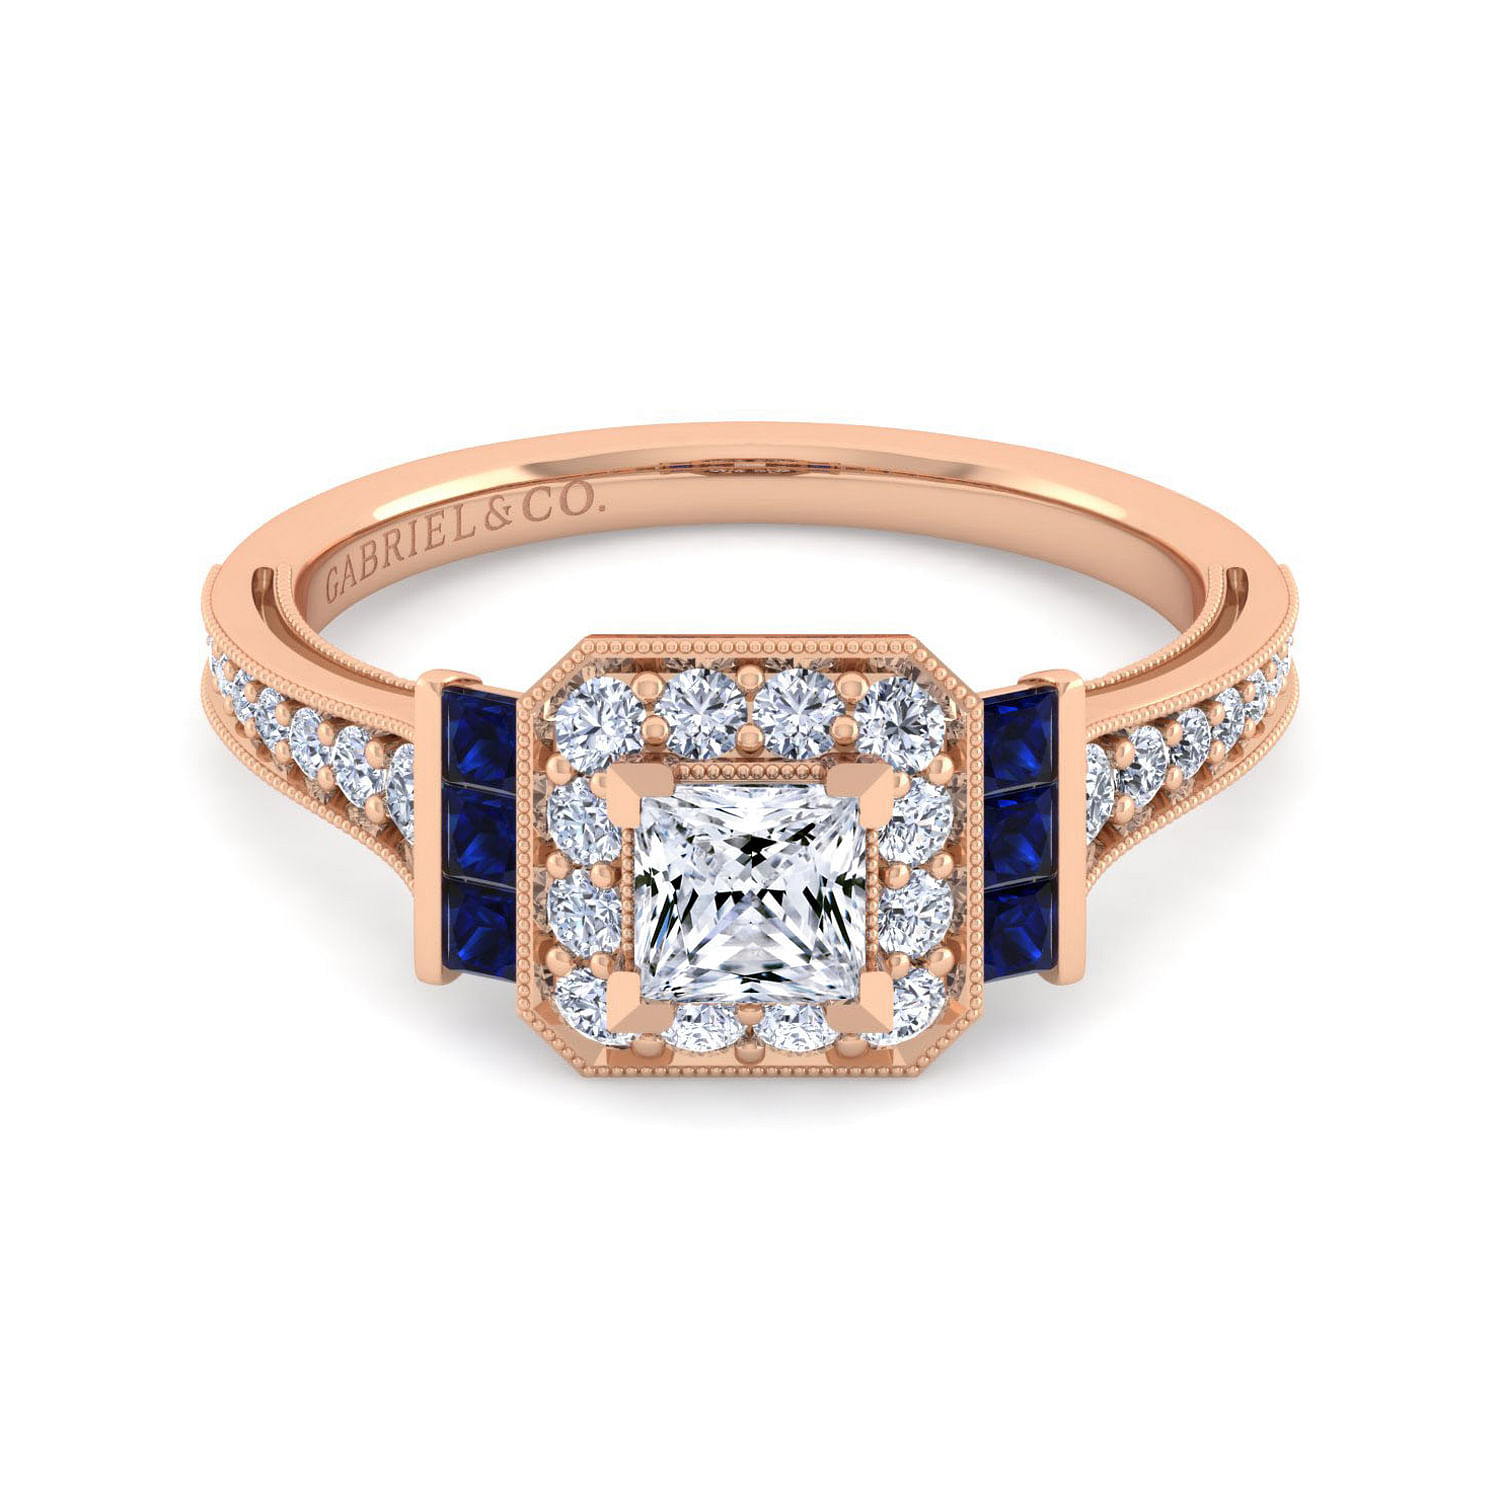 Vintage Inspired 14K Rose Gold Princess Halo Diamond and Sapphire Engagement Ring